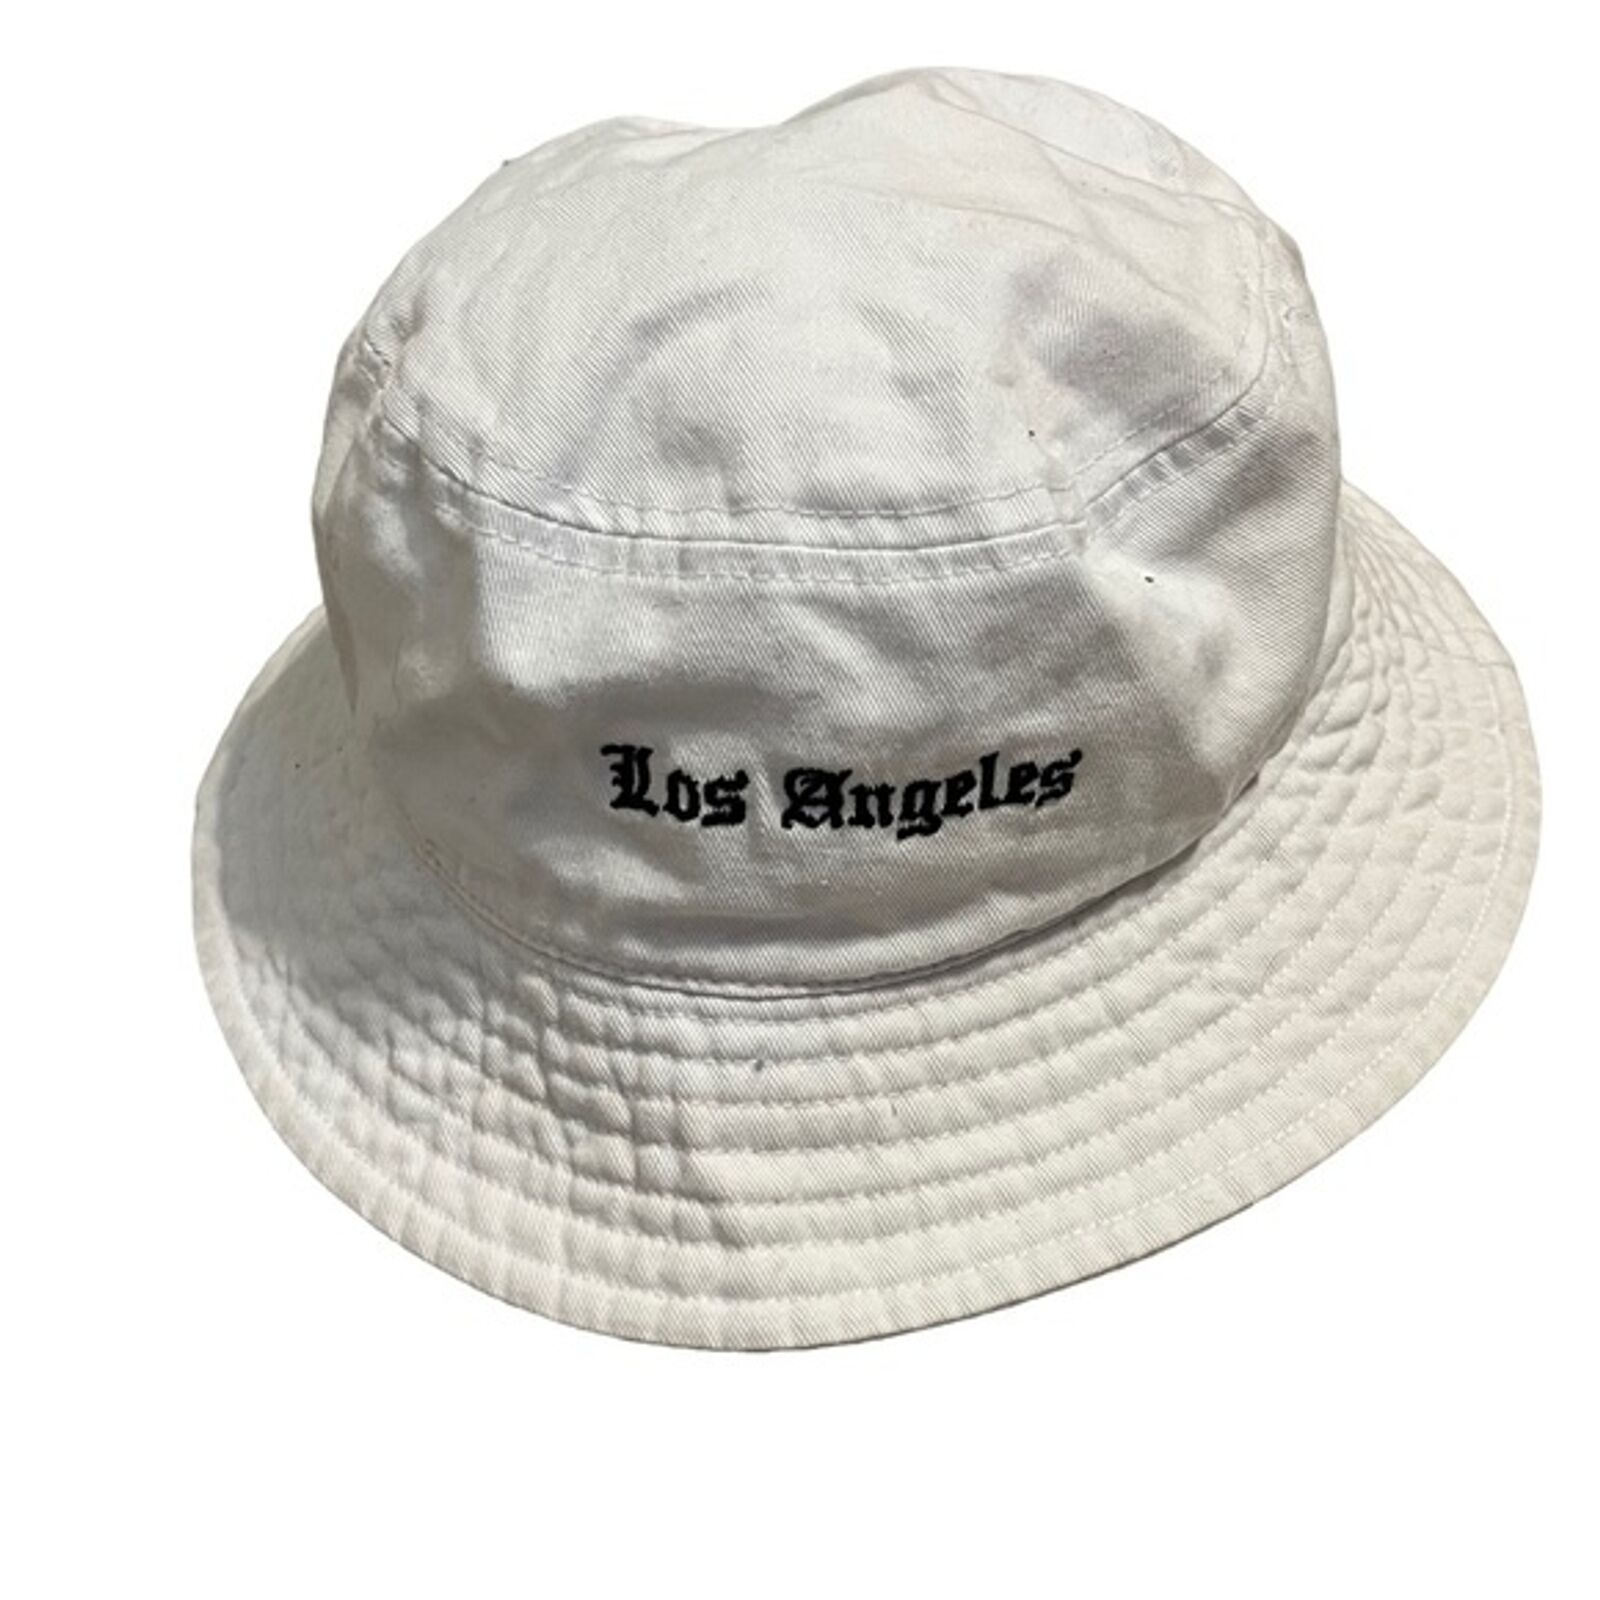 Bucket Hat - On Ebay - Multiple Results on One Page